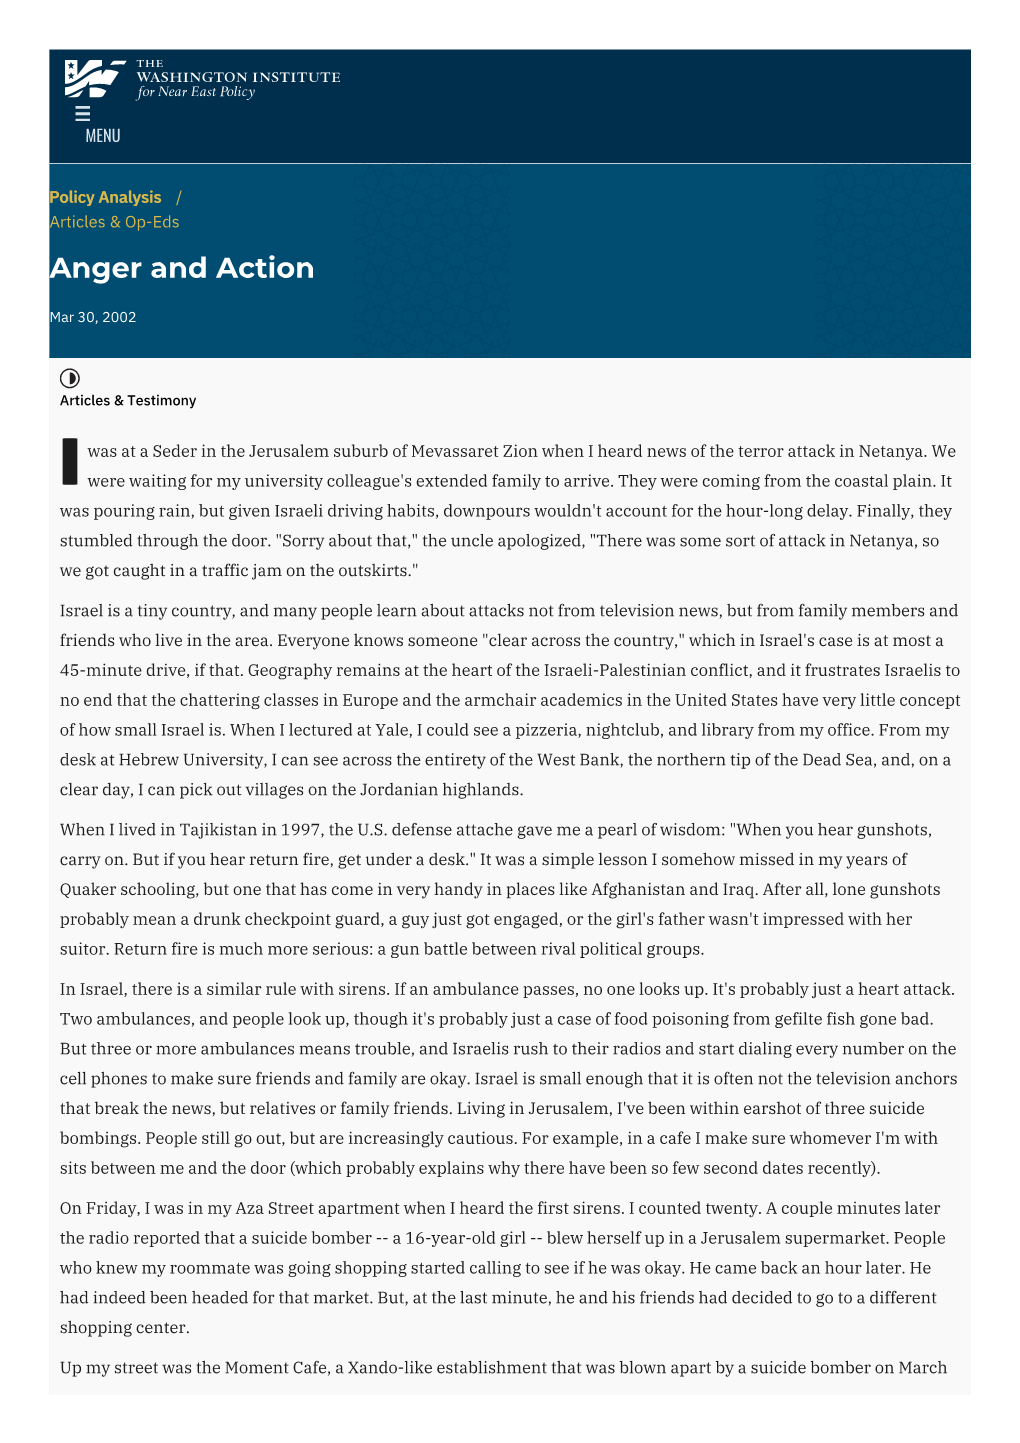 Anger and Action | the Washington Institute